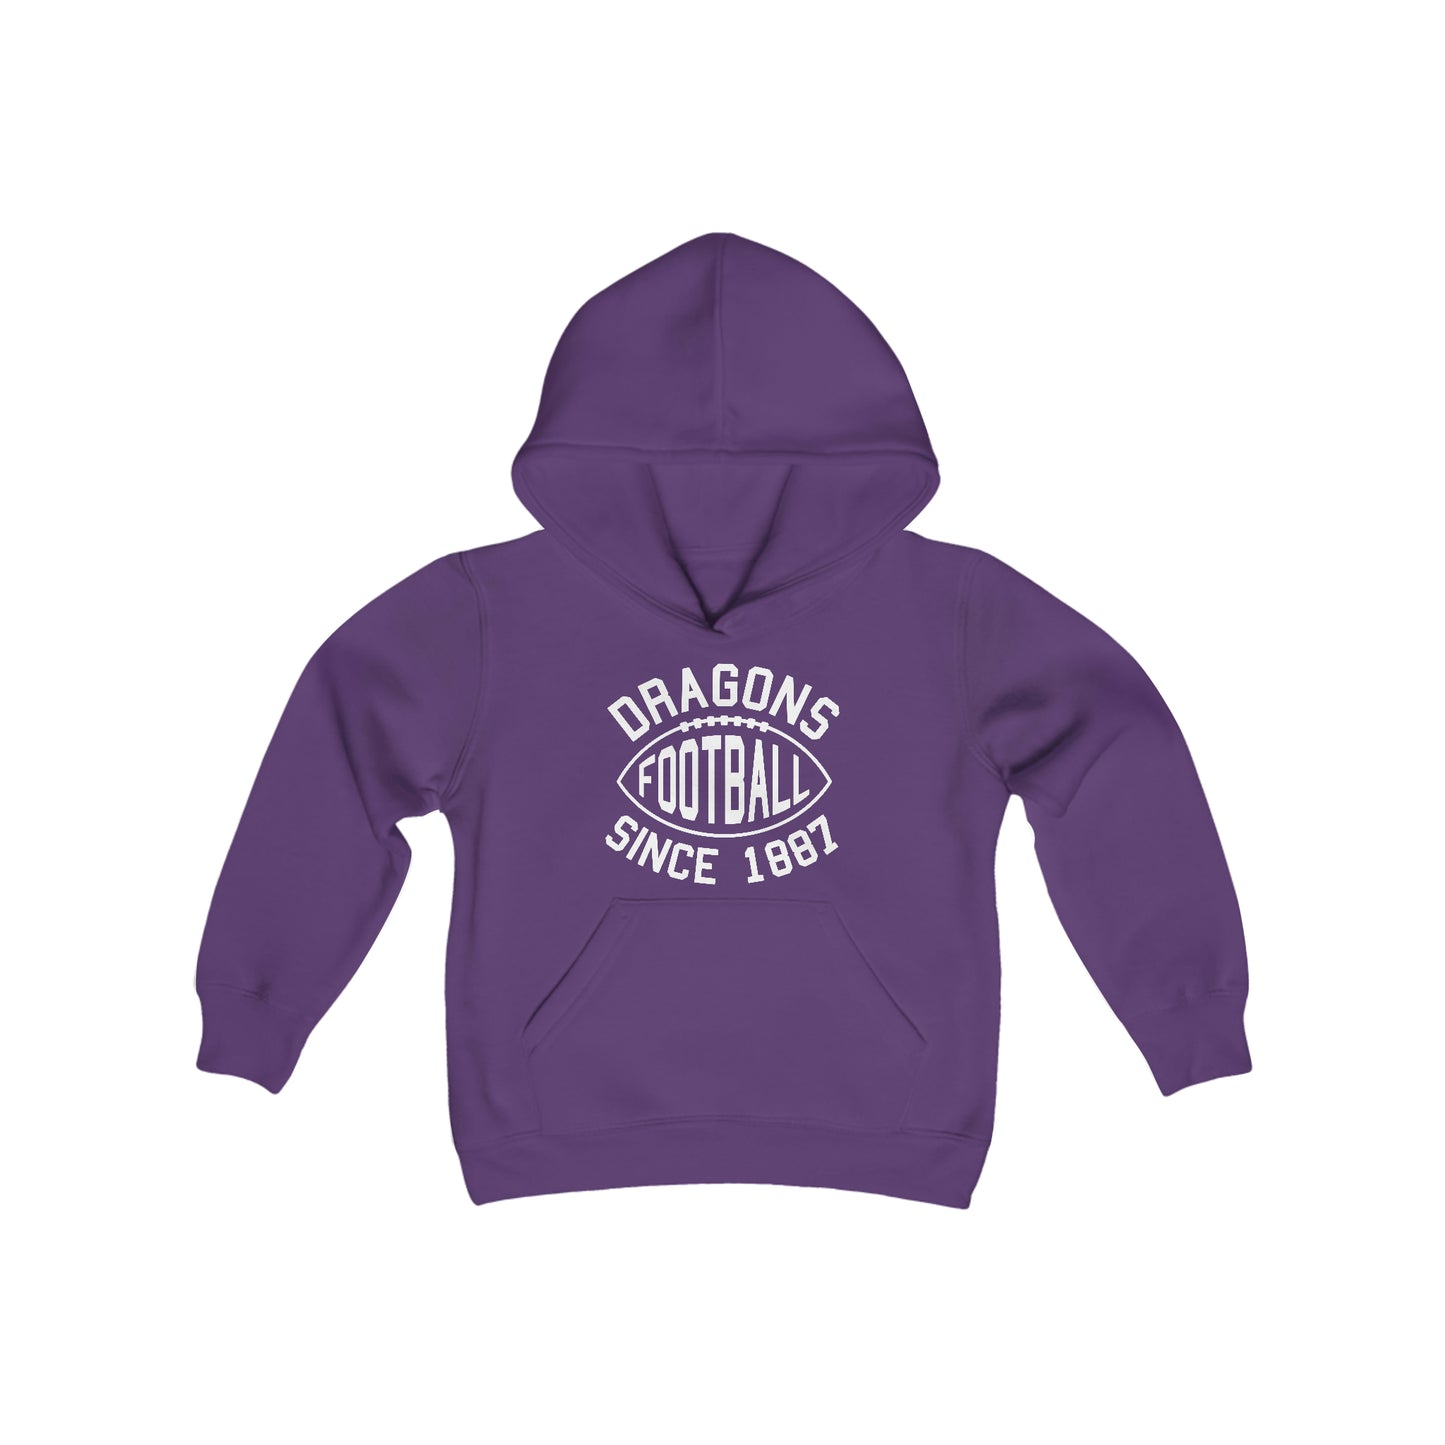 Dragons Football Youth Hoodie